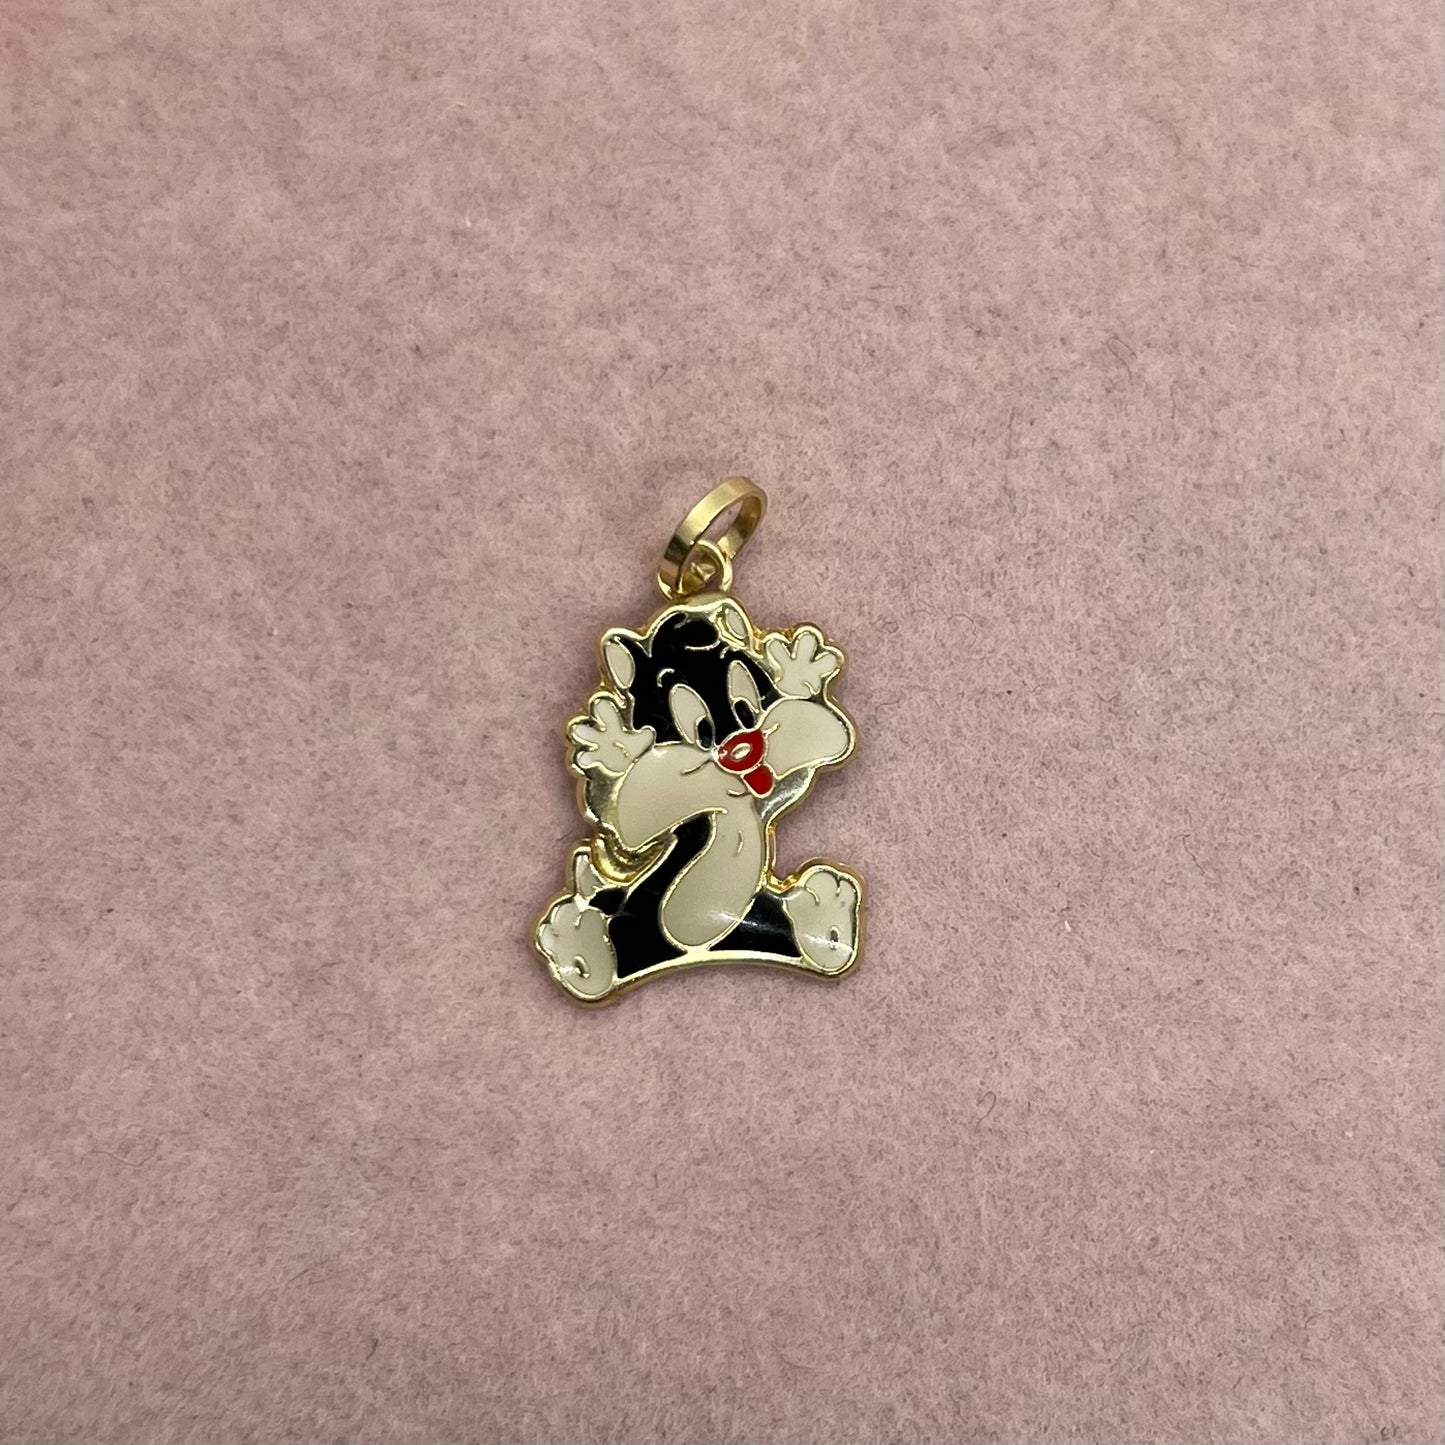 Baby Looney Tunes Enamel Charms from 2005